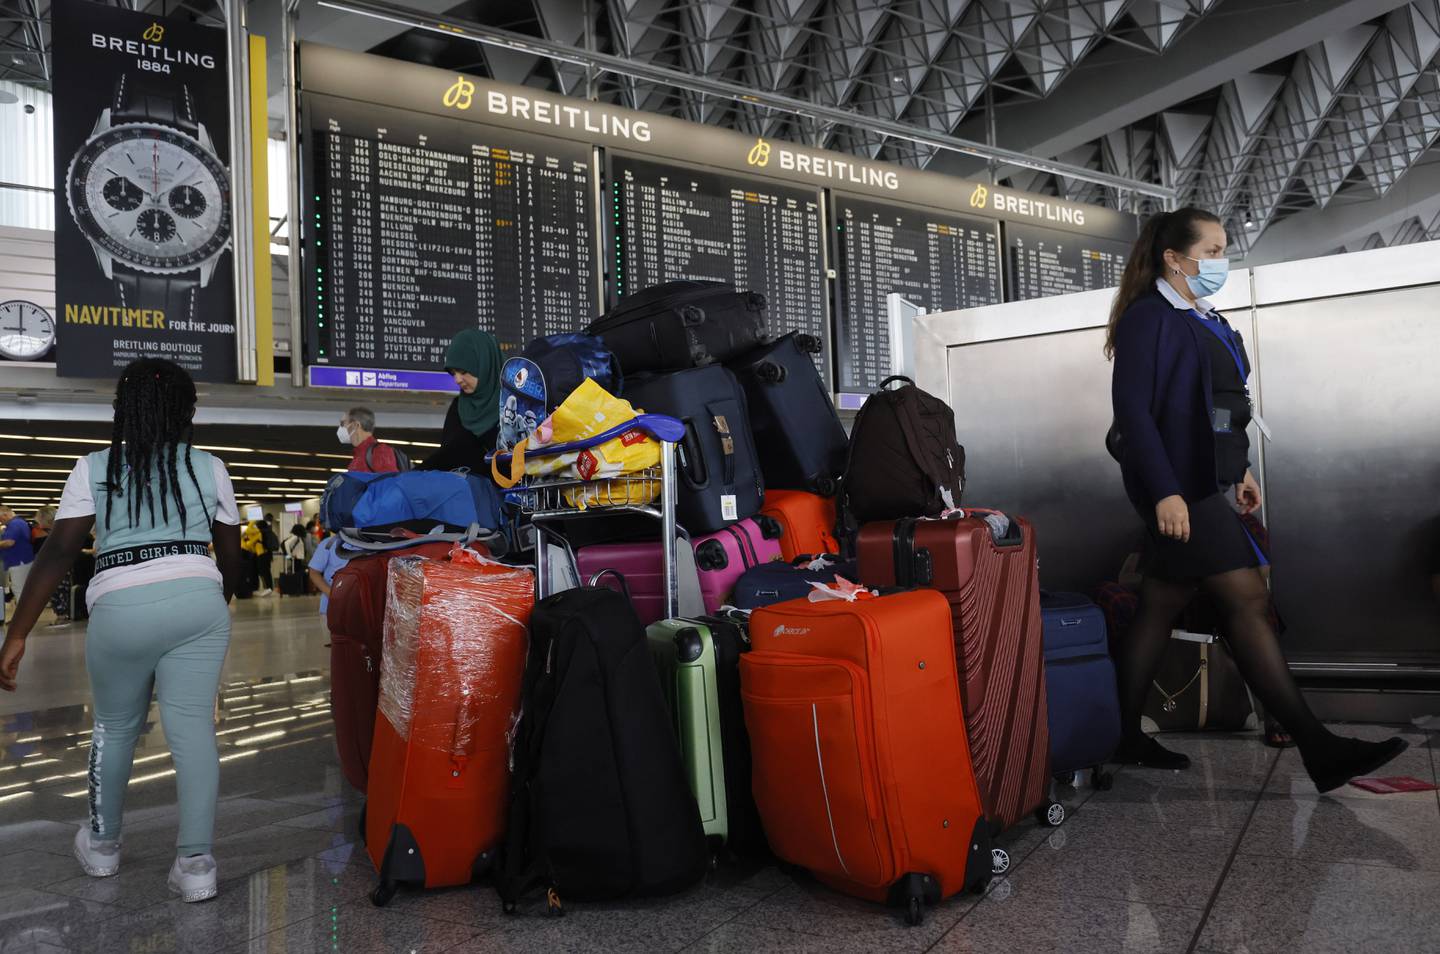 Luggage has been piling high at airports around the world, including this trolley in Frankfurt's airport, Germany. EPA